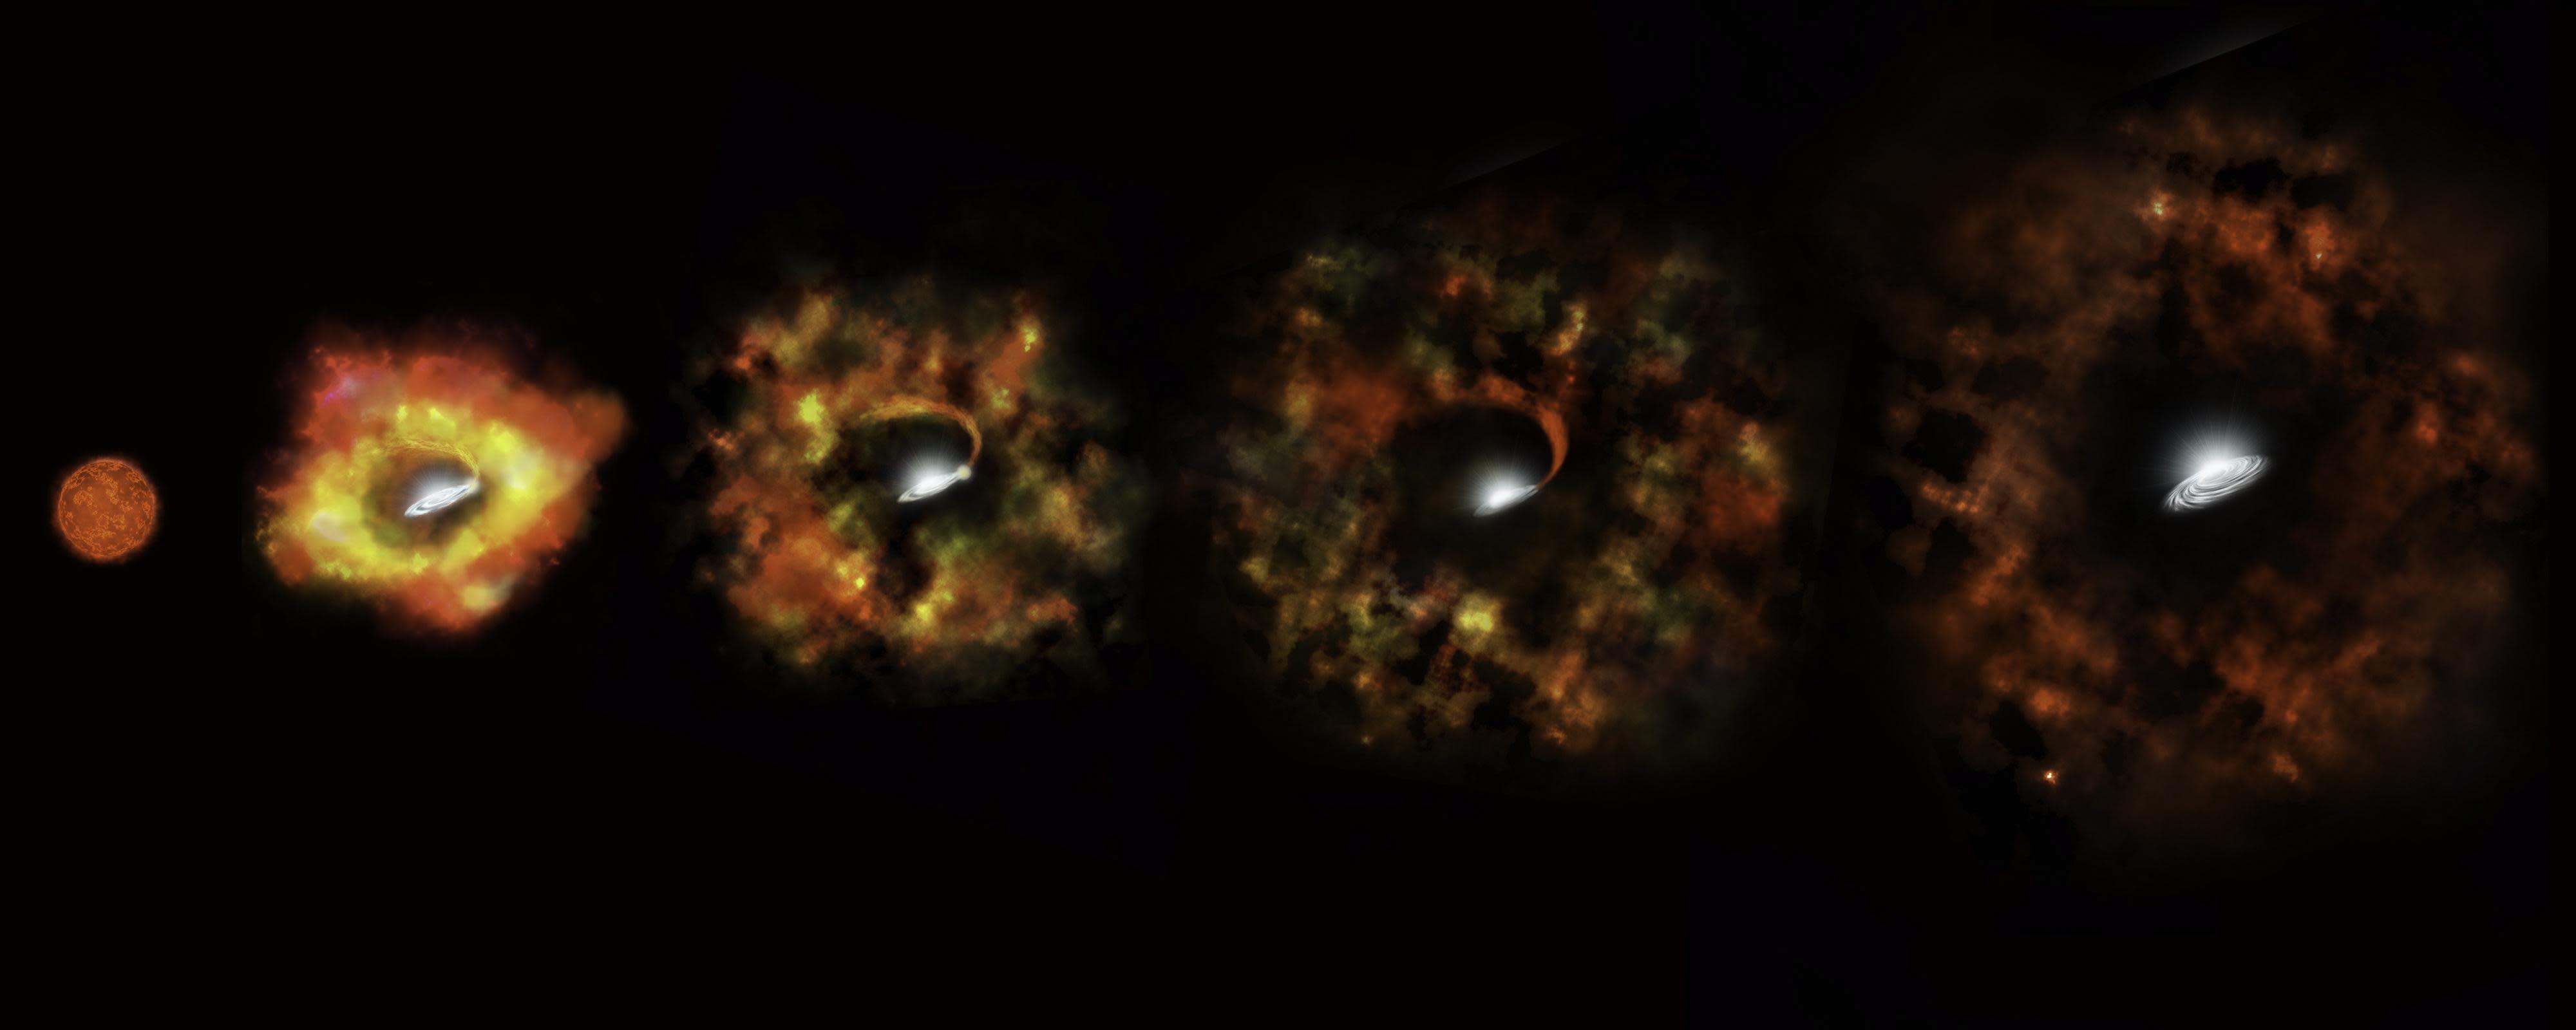 Scientists Watch Star Collapse Into Black Hole